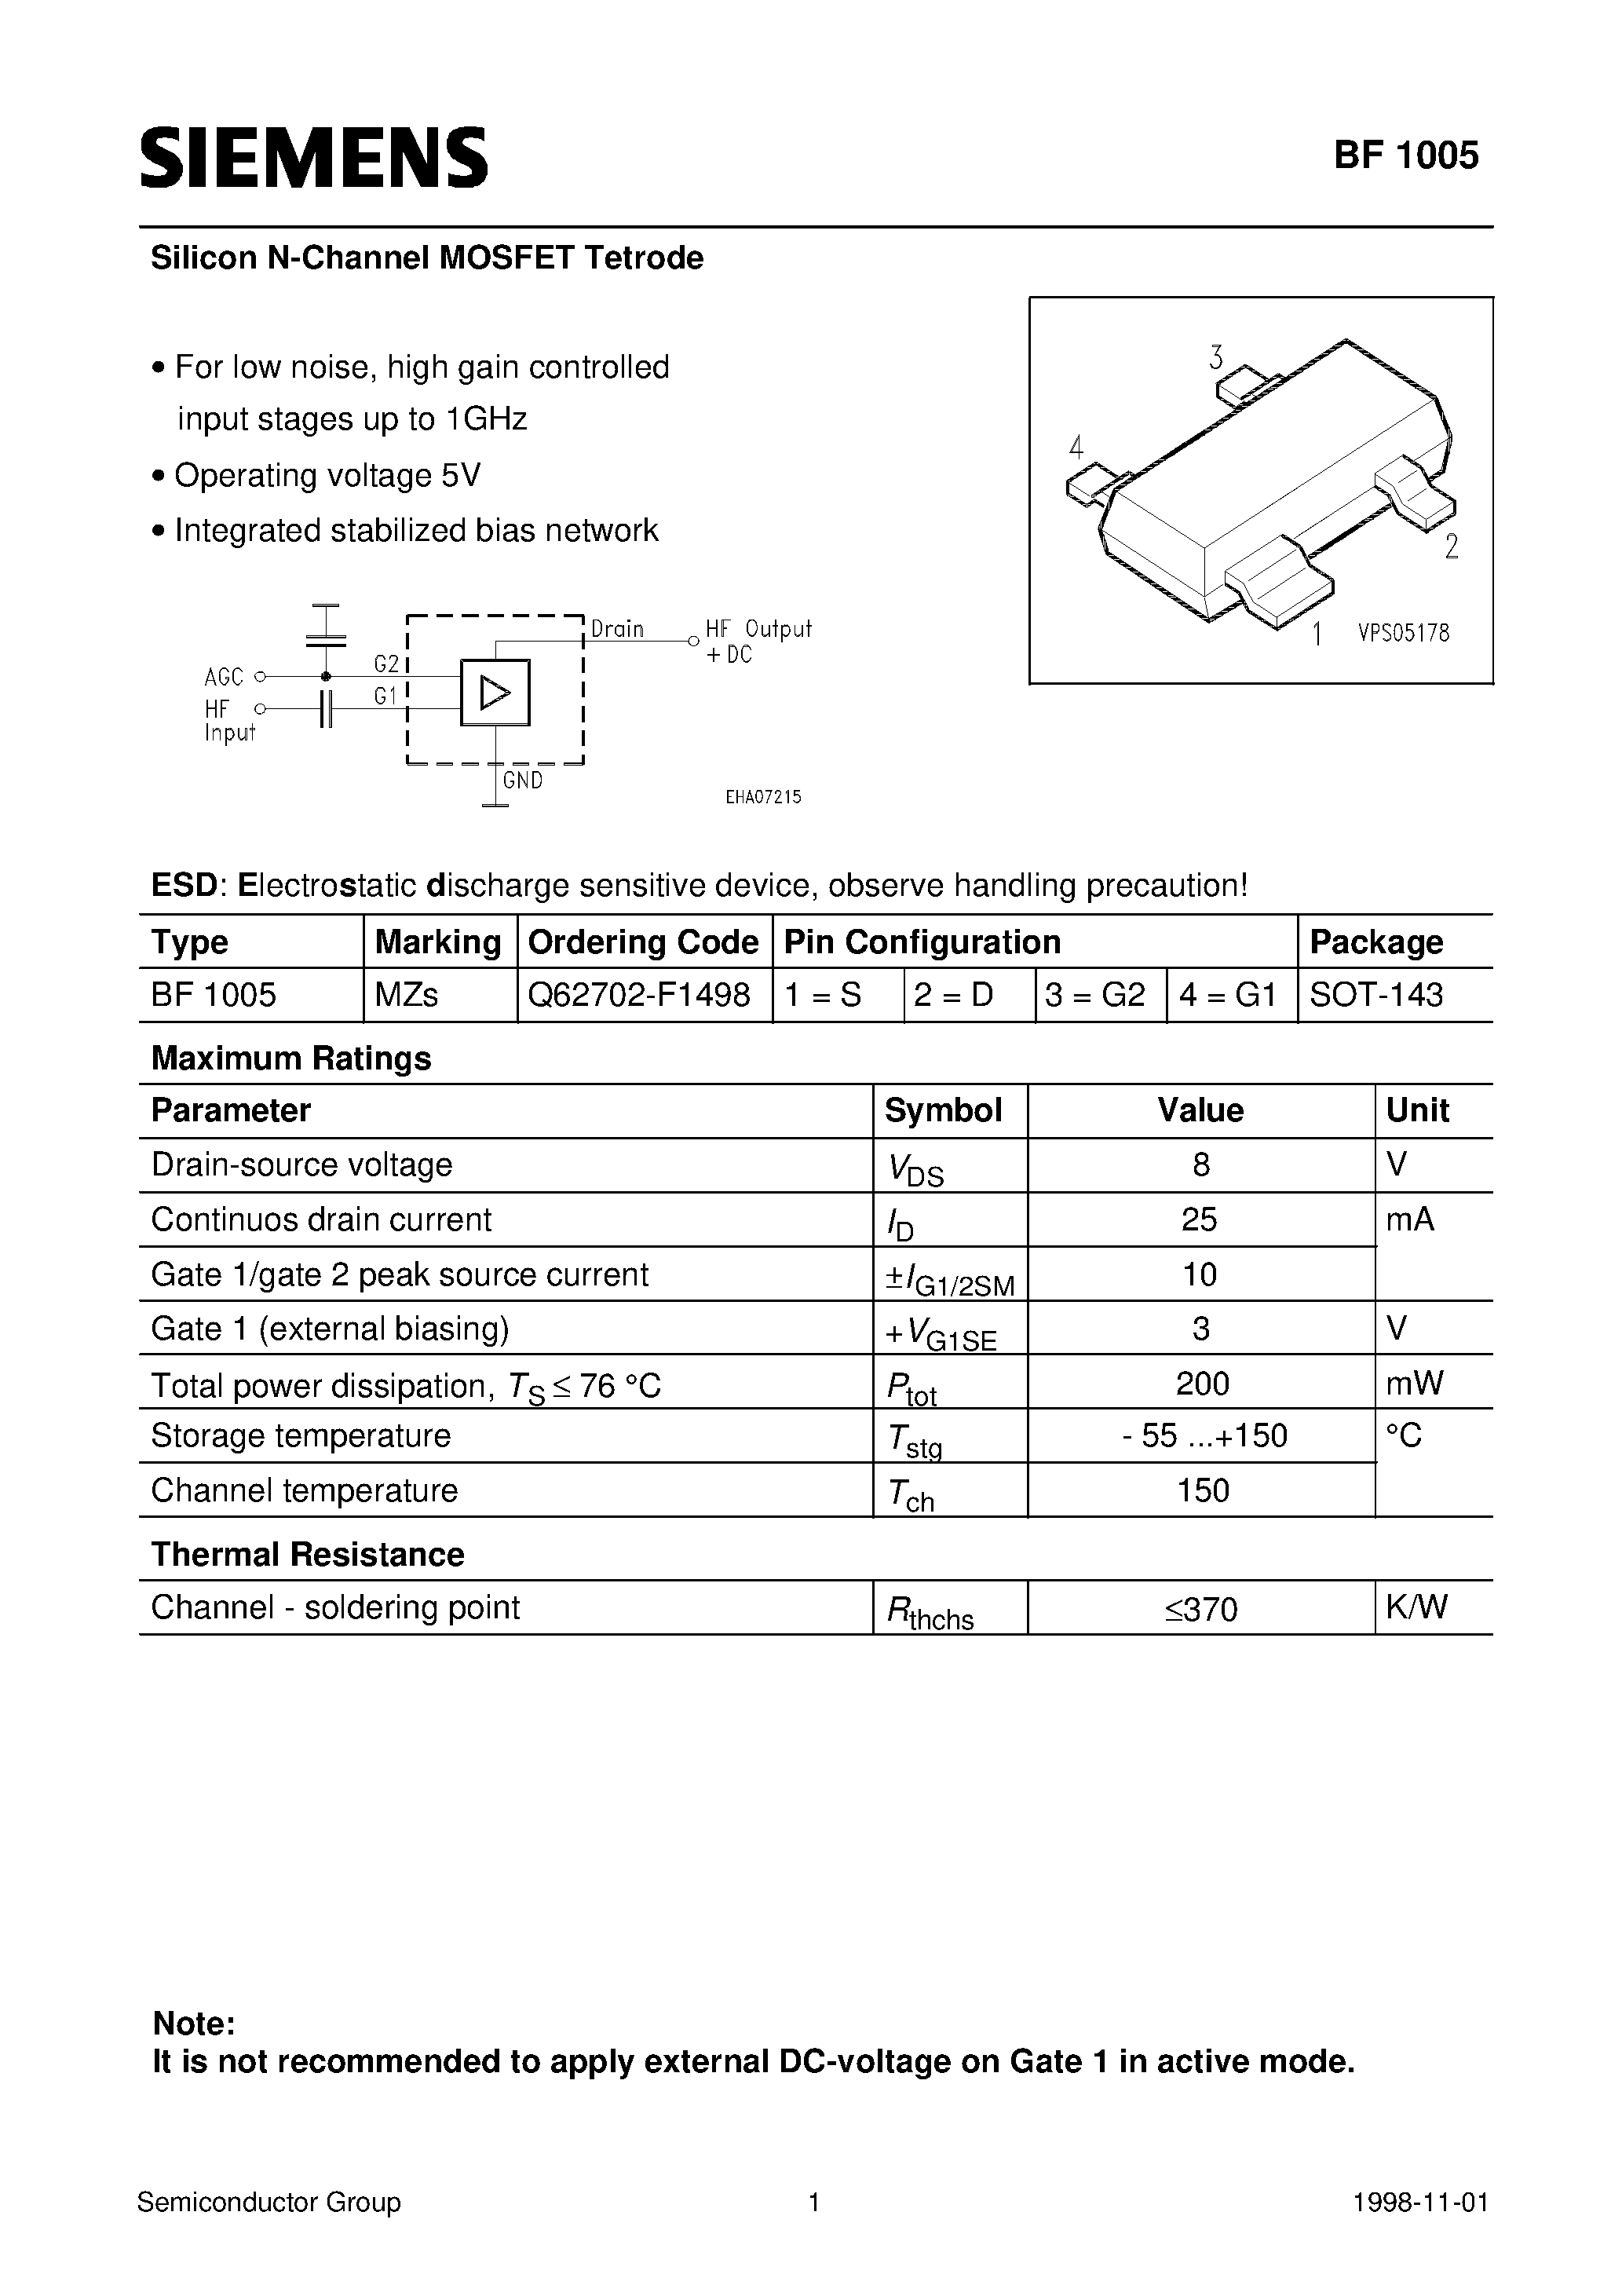 Datasheet BF1005 - Silicon N-Channel MOSFET Tetrode (For low noise/ high gain controlled input stages up to 1GHz Operating voltage 5V Integrated stabilized bias network) page 1